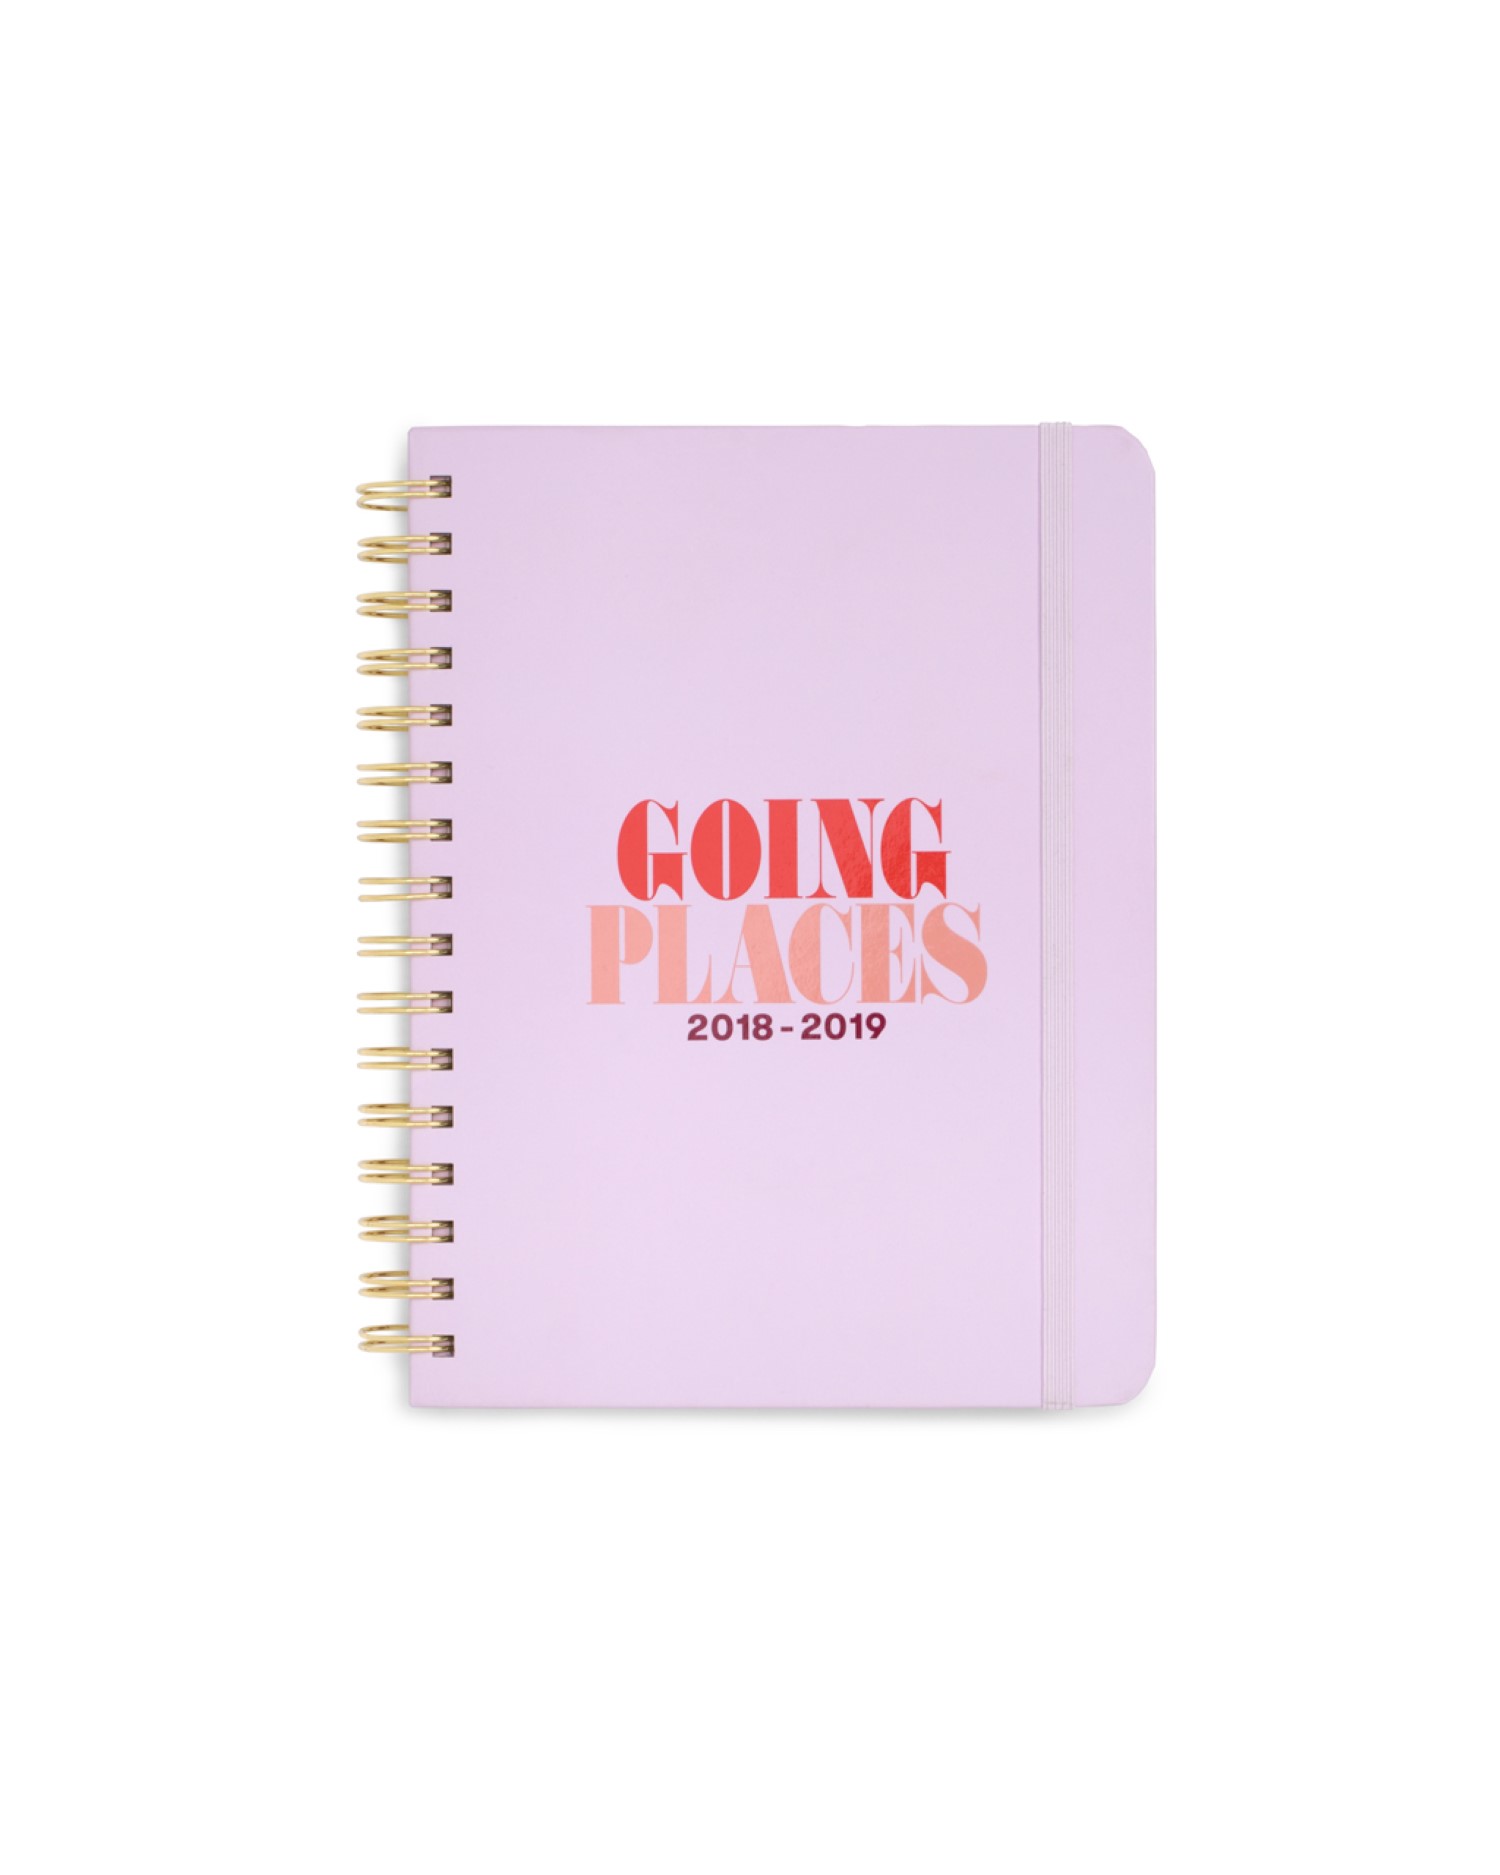 Ban.do Going Places Medium Planner Aug 2018-19